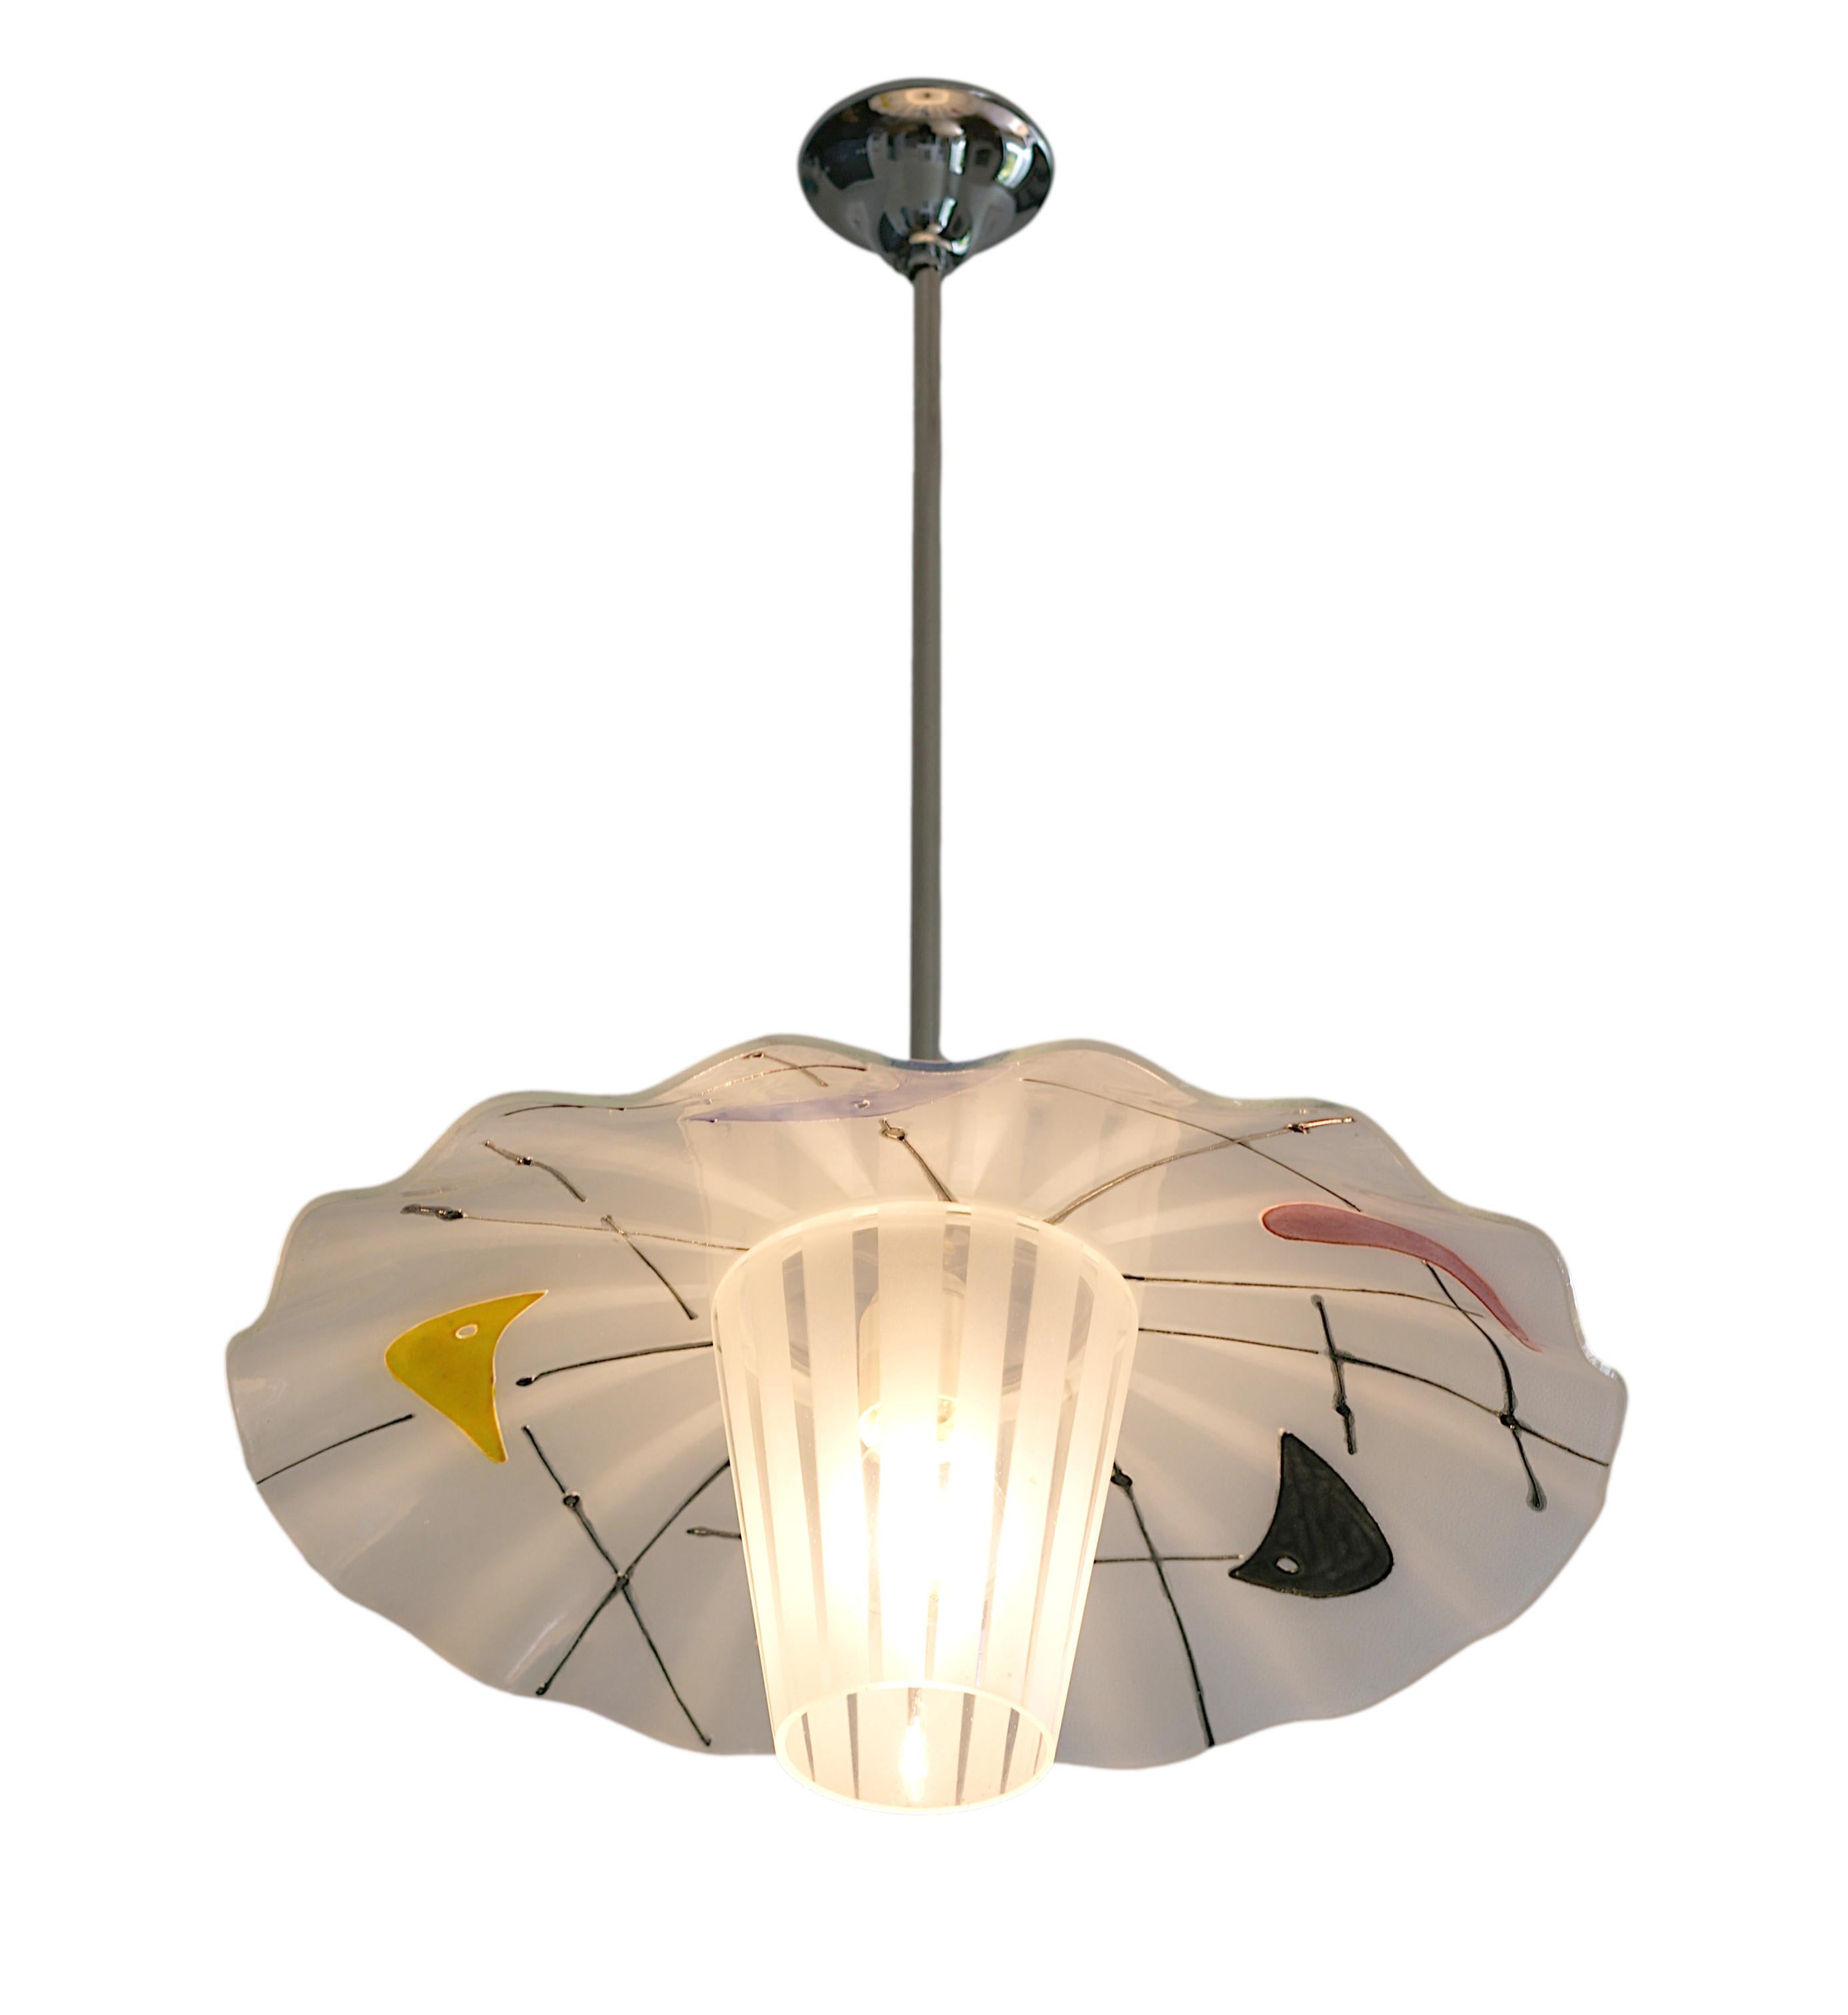 French midcentury pendant chandelier, France, 1950s. Glass & chrome. Height : 23.6